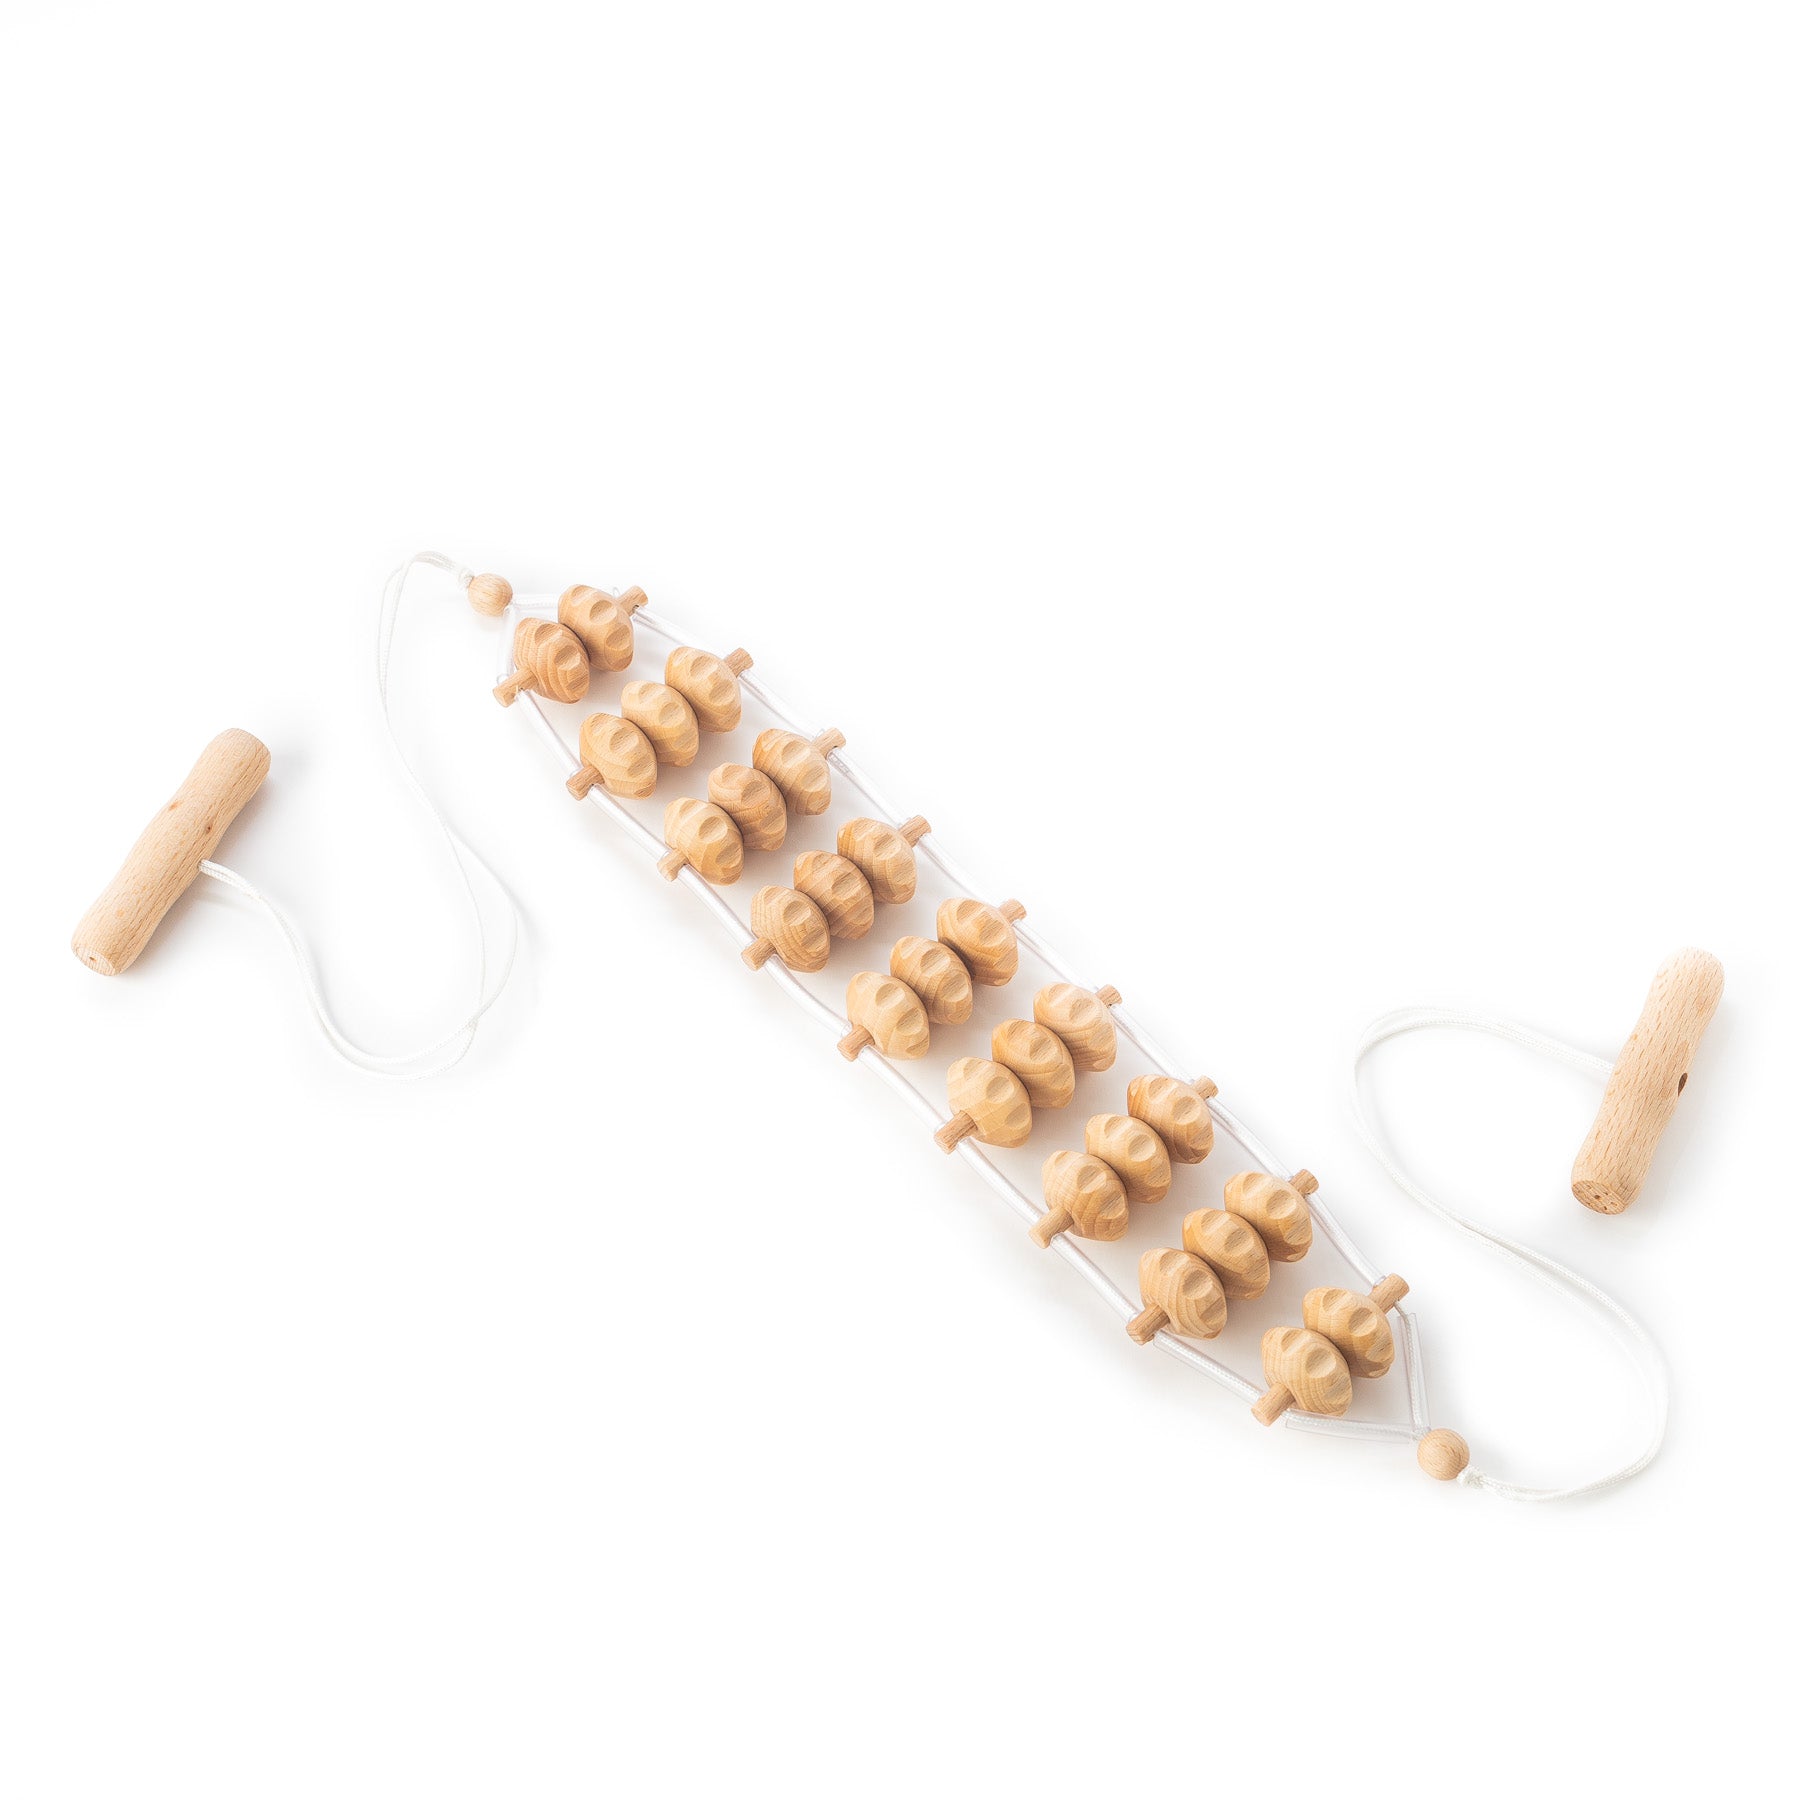 https://cdn.shopify.com/s/files/1/0515/2440/3381/products/wooden-back-massager-roller-rope-120-cm-tuuli-accessories-268.jpg